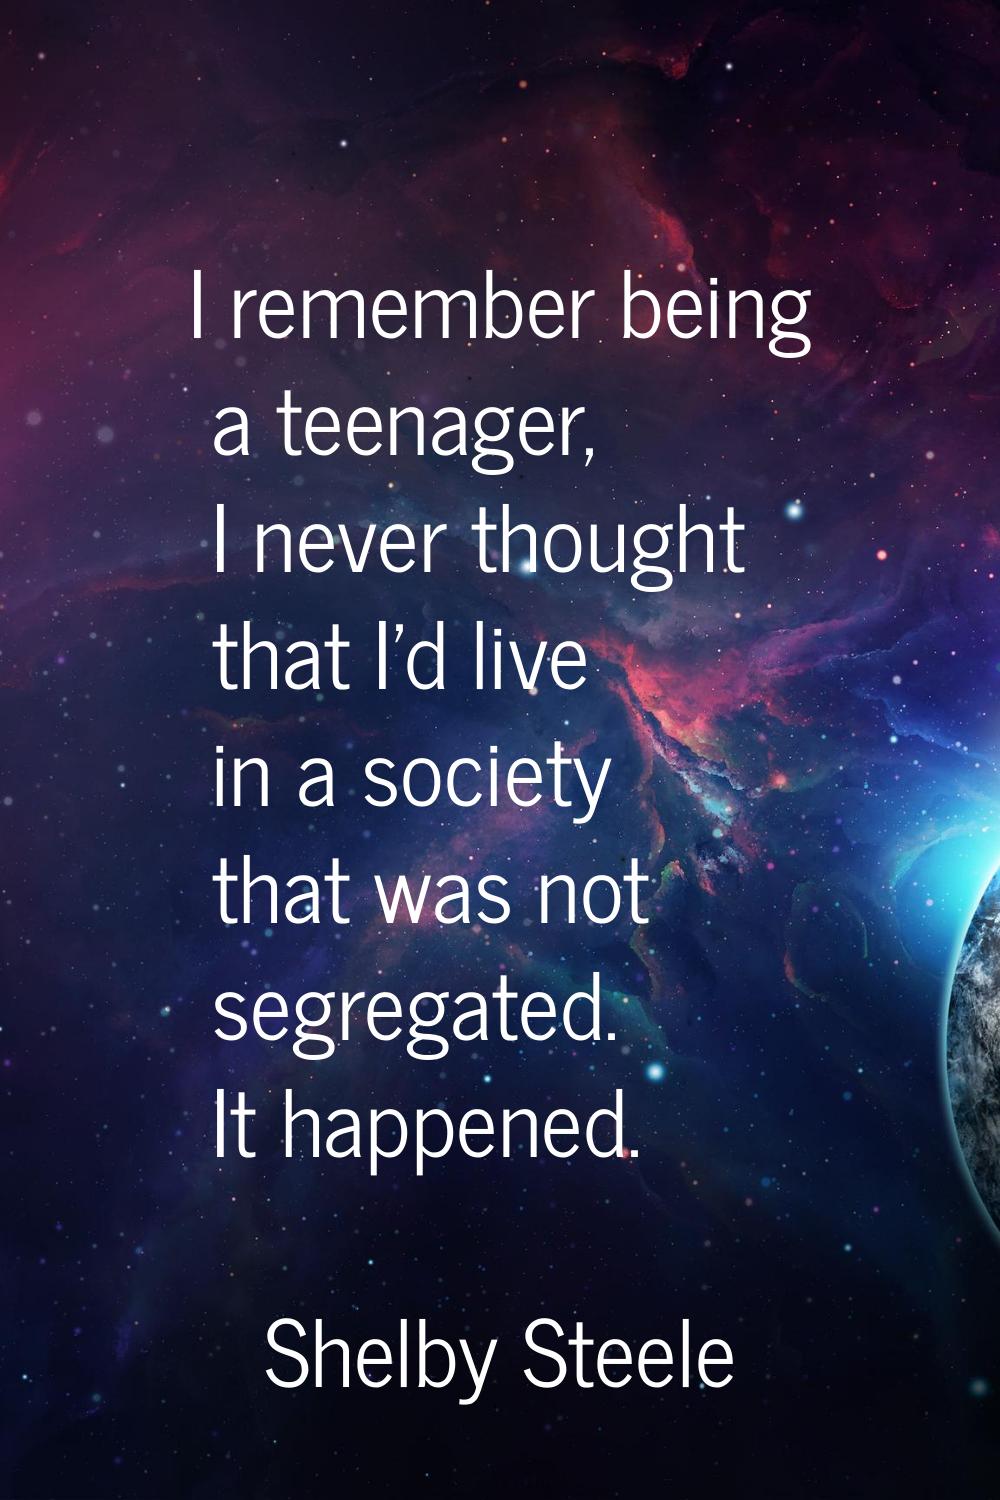 I remember being a teenager, I never thought that I'd live in a society that was not segregated. It